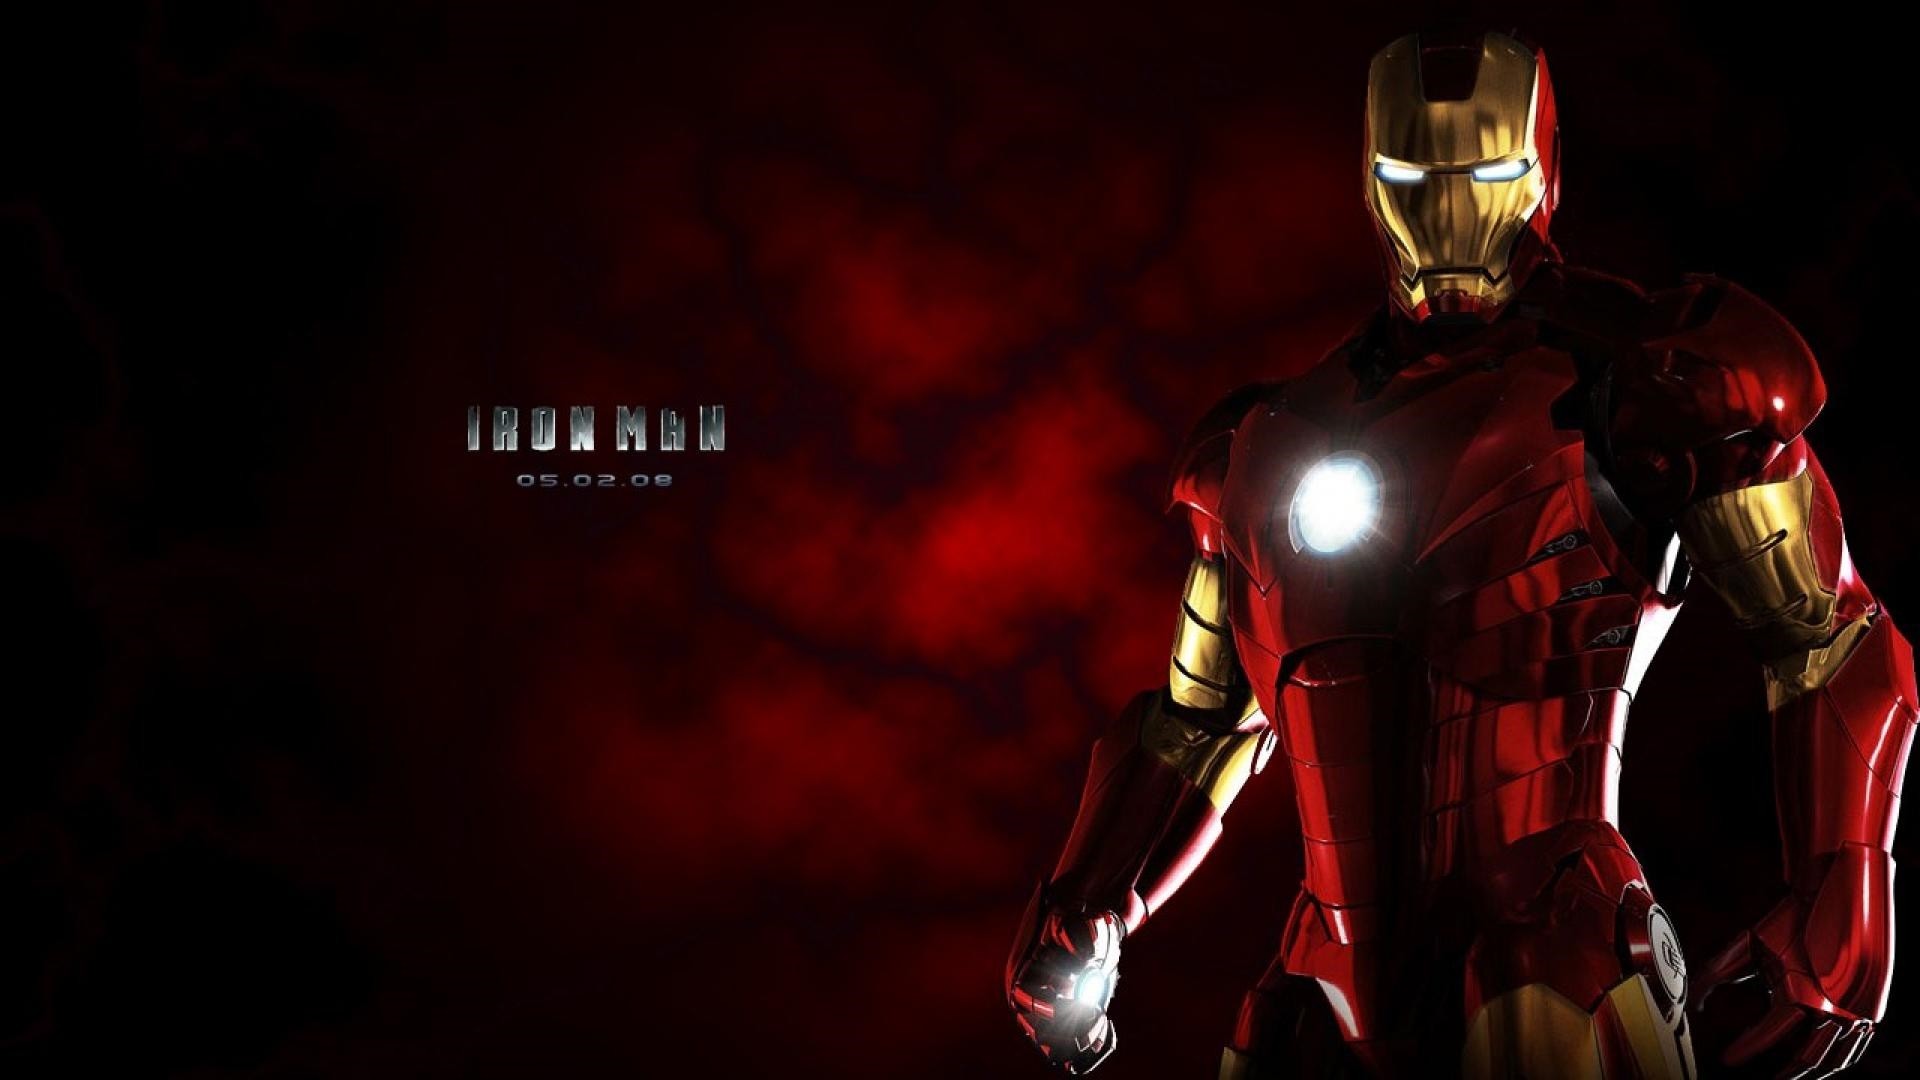 Iron man full hd wallpapers on wallpaperget com